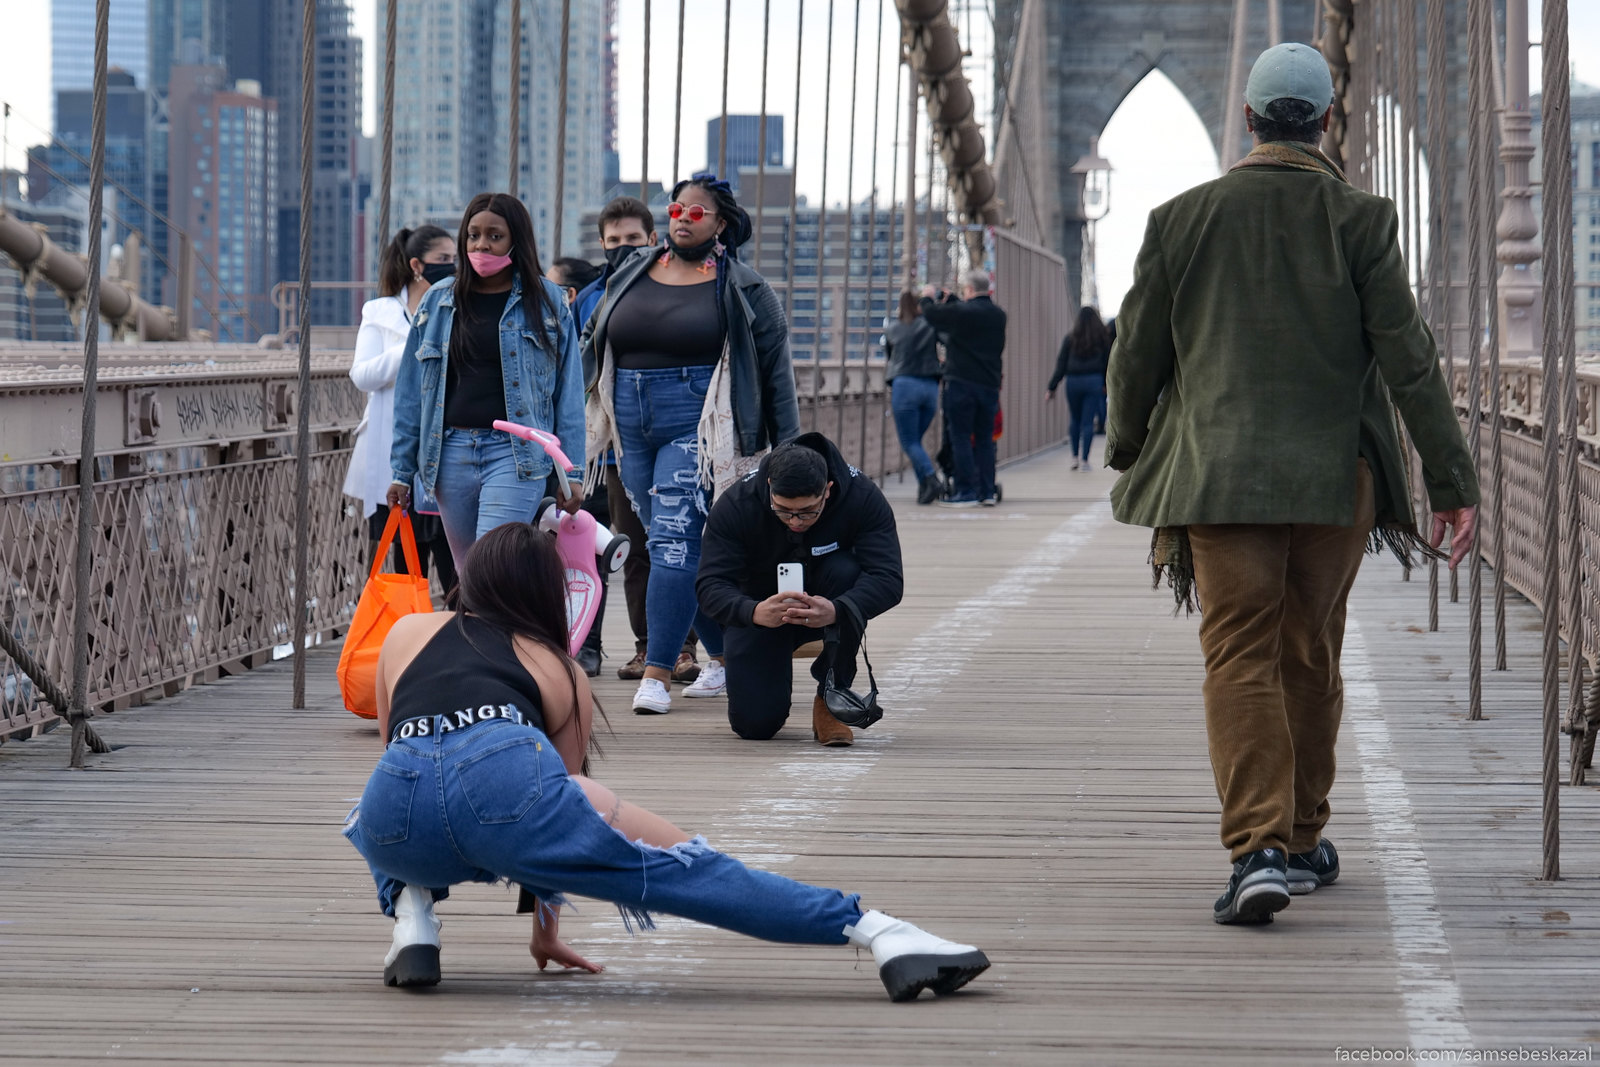 A photo of someone taking a photo of someone on the Brooklyn Bridge